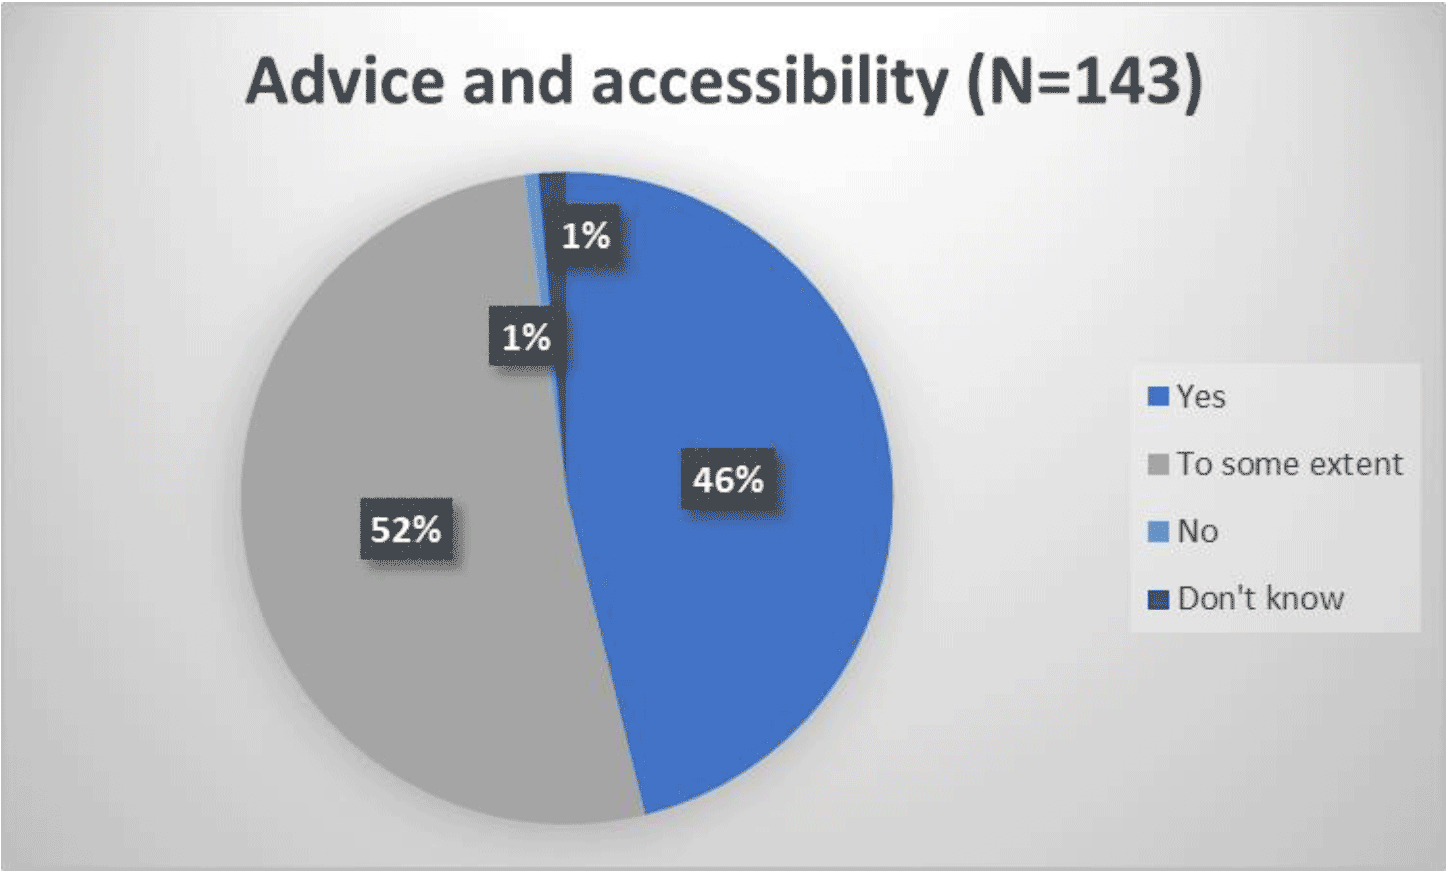 Pie chart showing responses to whether the guidance fulfils its advice and accessibility objectives:
Yes 46%
To some extent 52%
No 1%
Don't know 1%